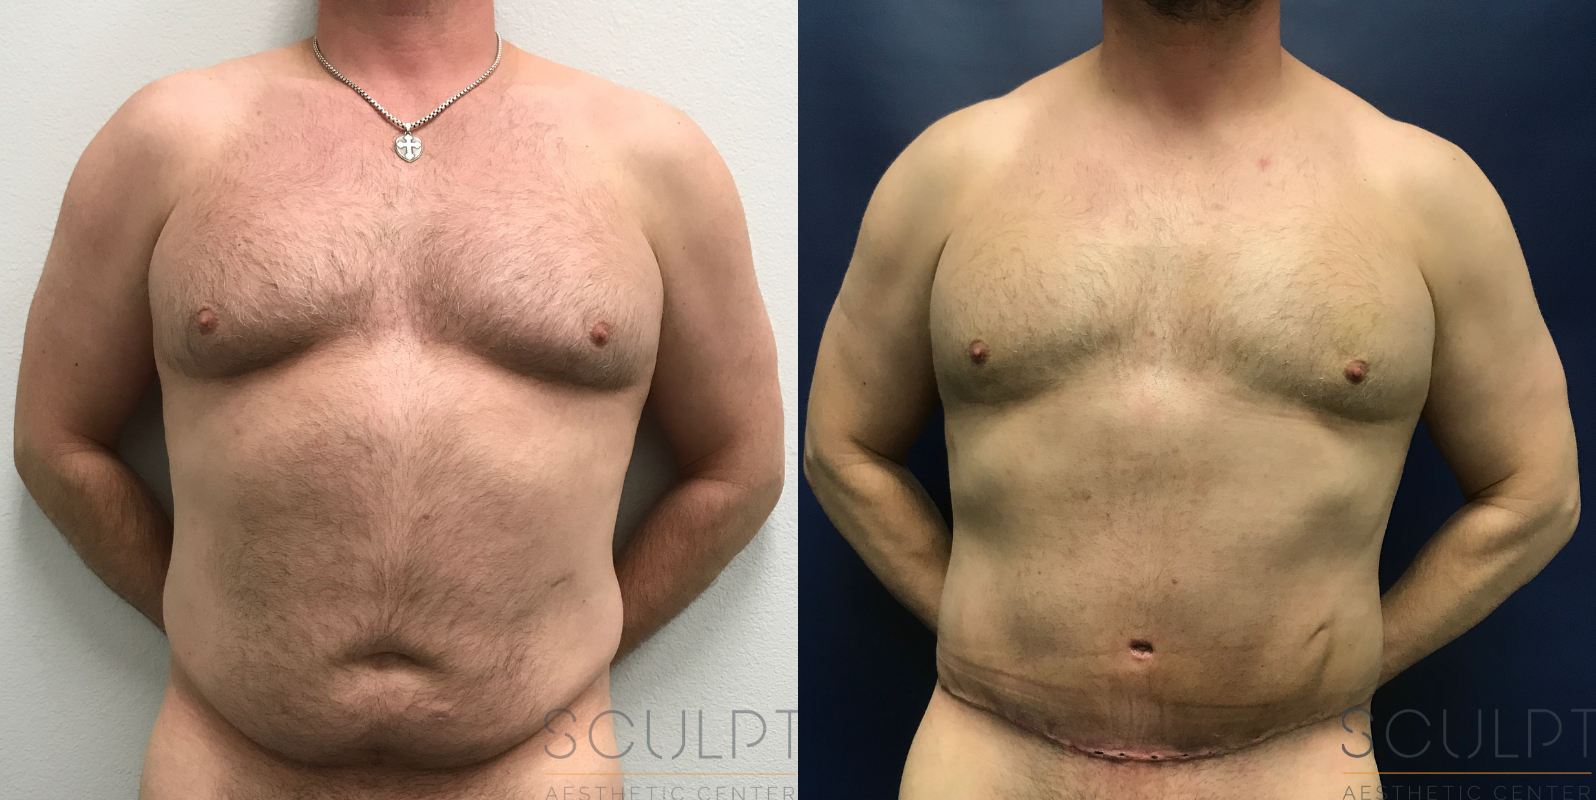 Male Gluteal Buttock Augmentation Before and After Photo by Sculpt Aesthetic Center in Frisco, TX